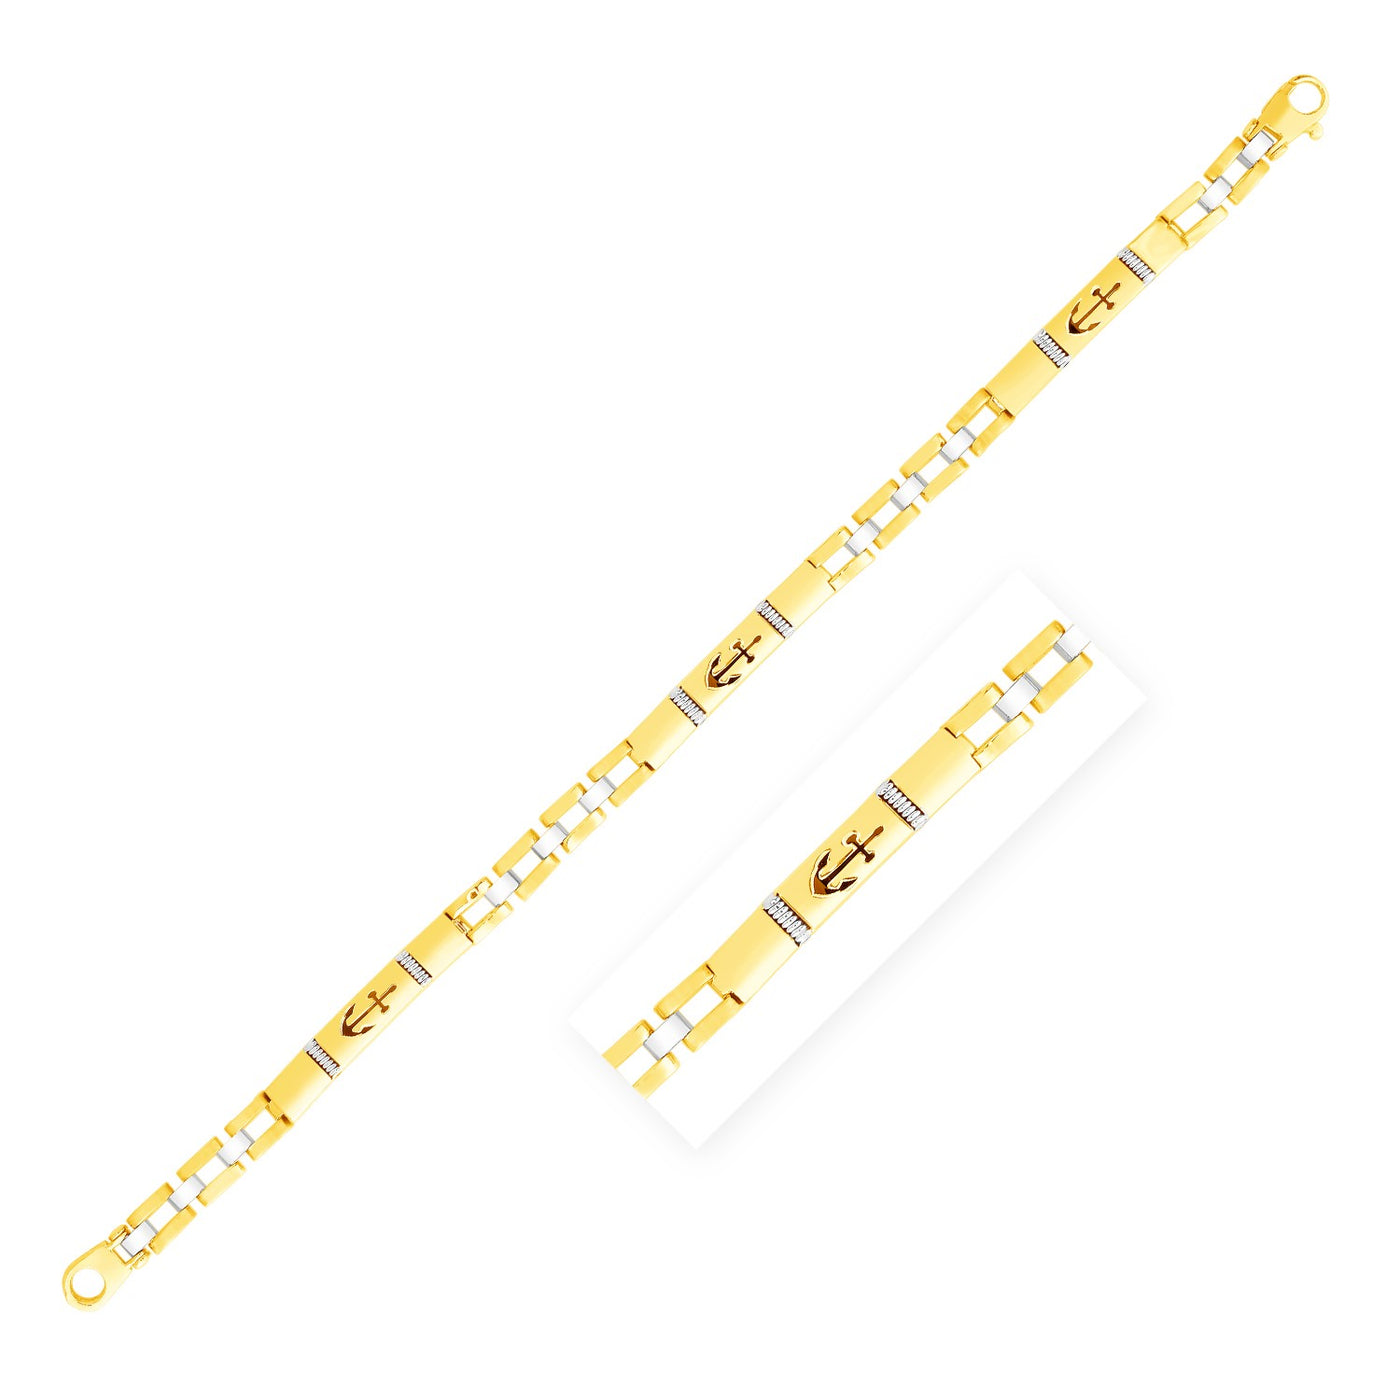 14k Yellow Gold Link Bracelet with Anchors